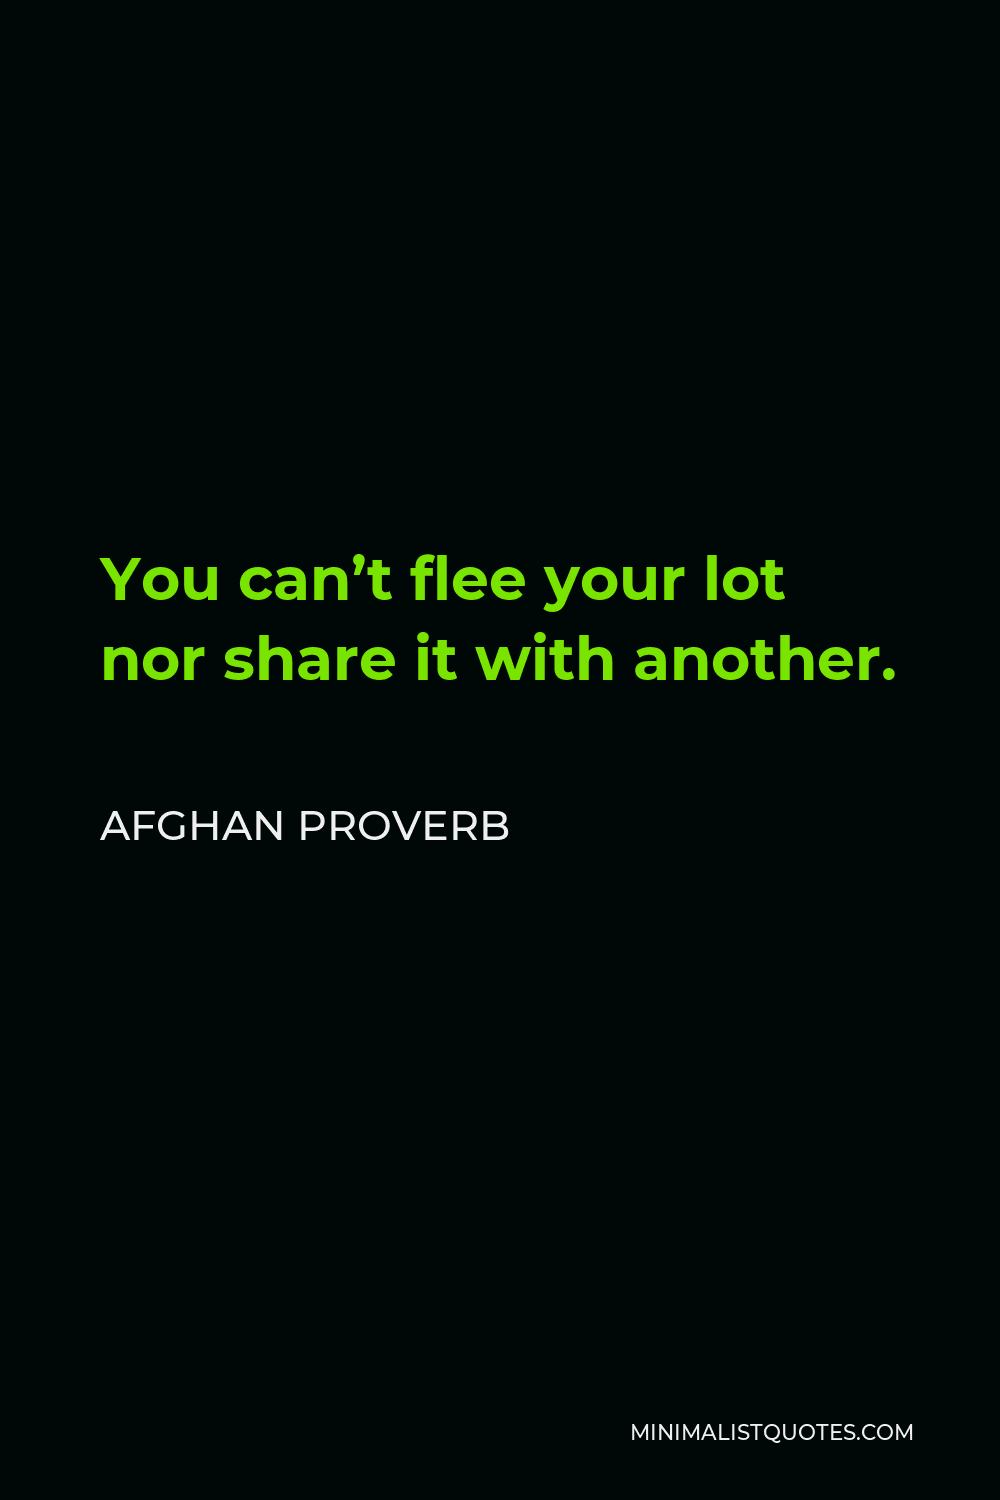 Afghan Proverb Quote - You can’t flee your lot nor share it with another.